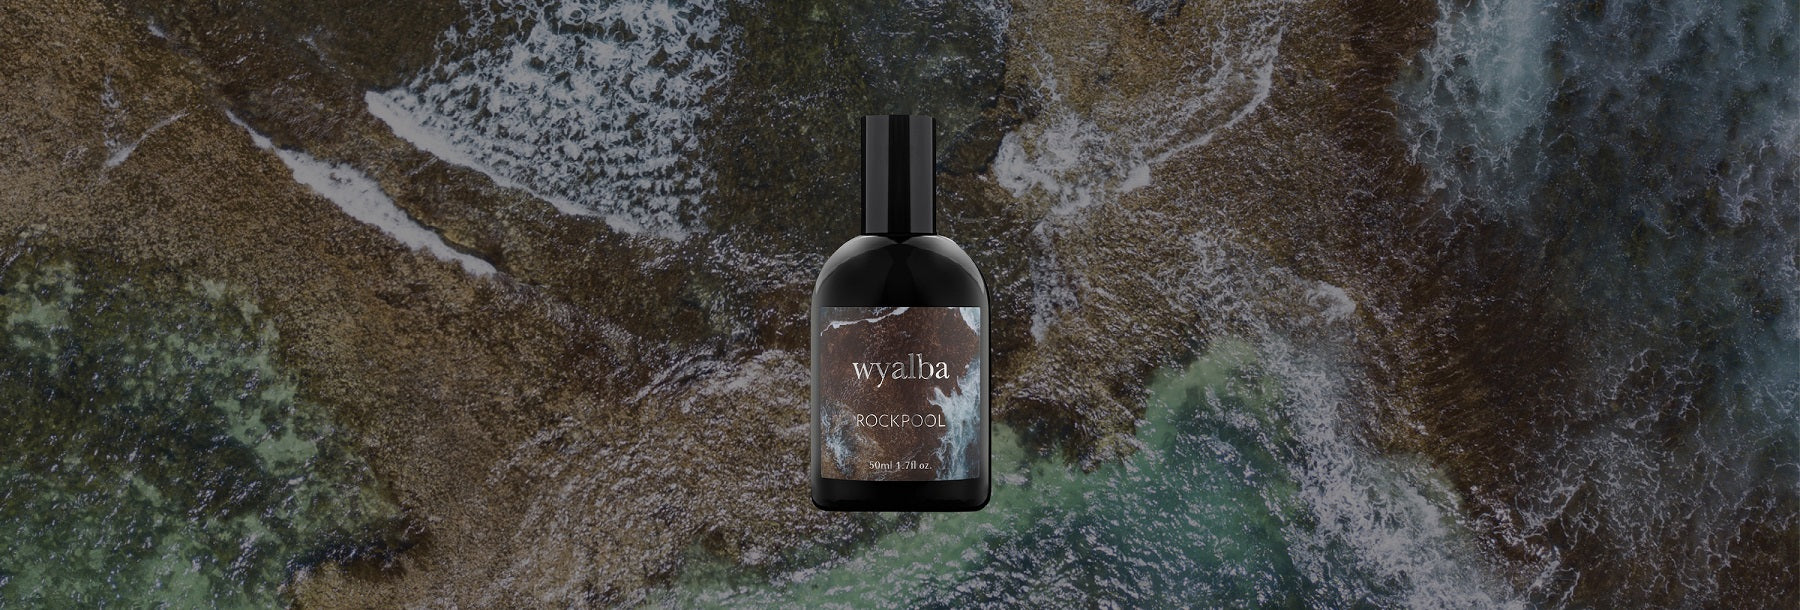 Buy Wyalba Natural Perfumes at One Fine Secret. Official Stockist. Clean Beauty Store in Melbourne, Australia.